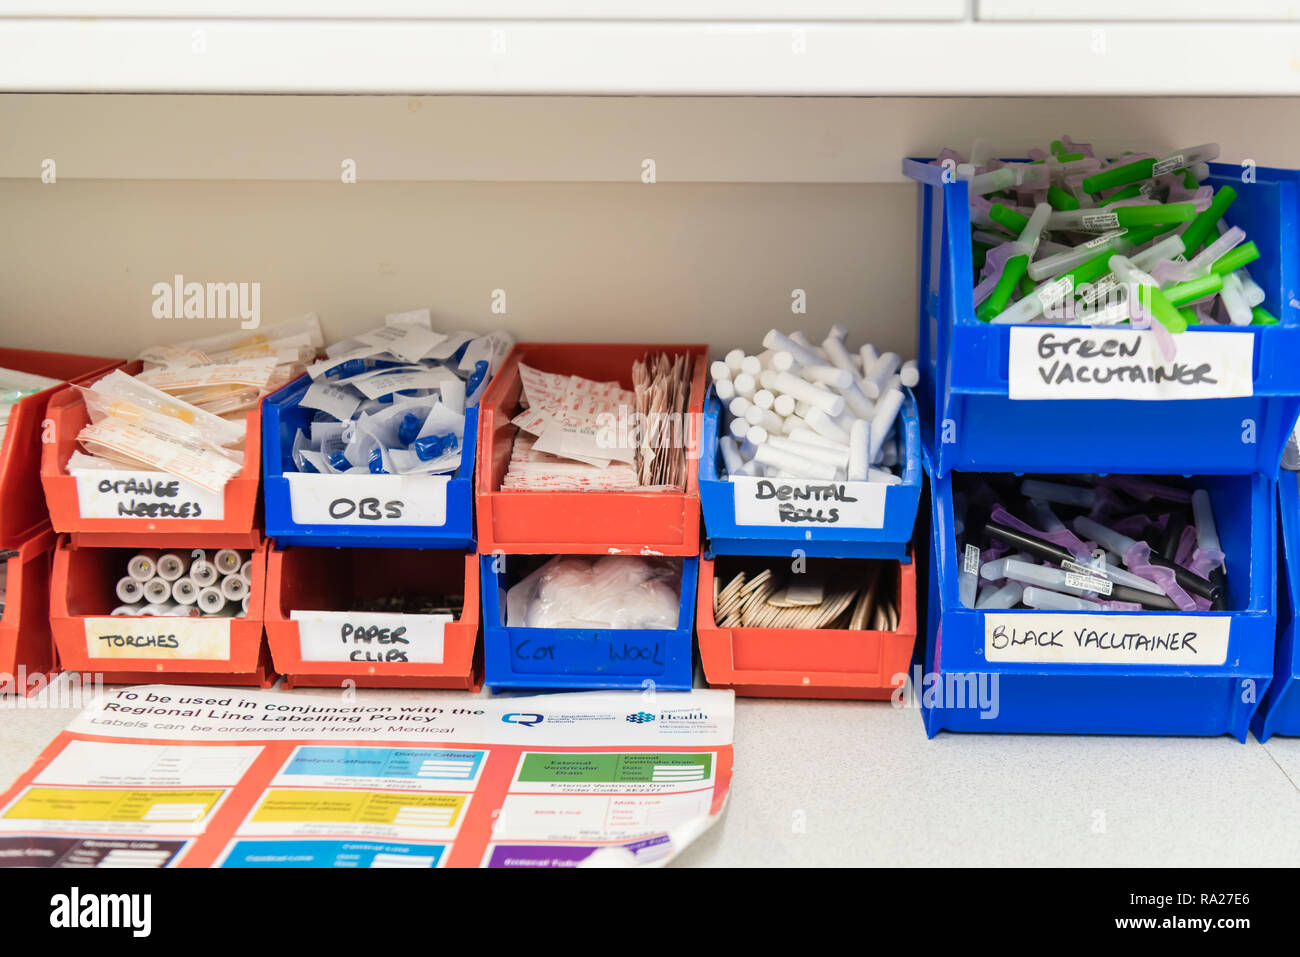 Plastic tubs containing medical equipment, including butterfly needles, vacutainers, torches etc for taking blood samples in a hospital treatment room Stock Photo